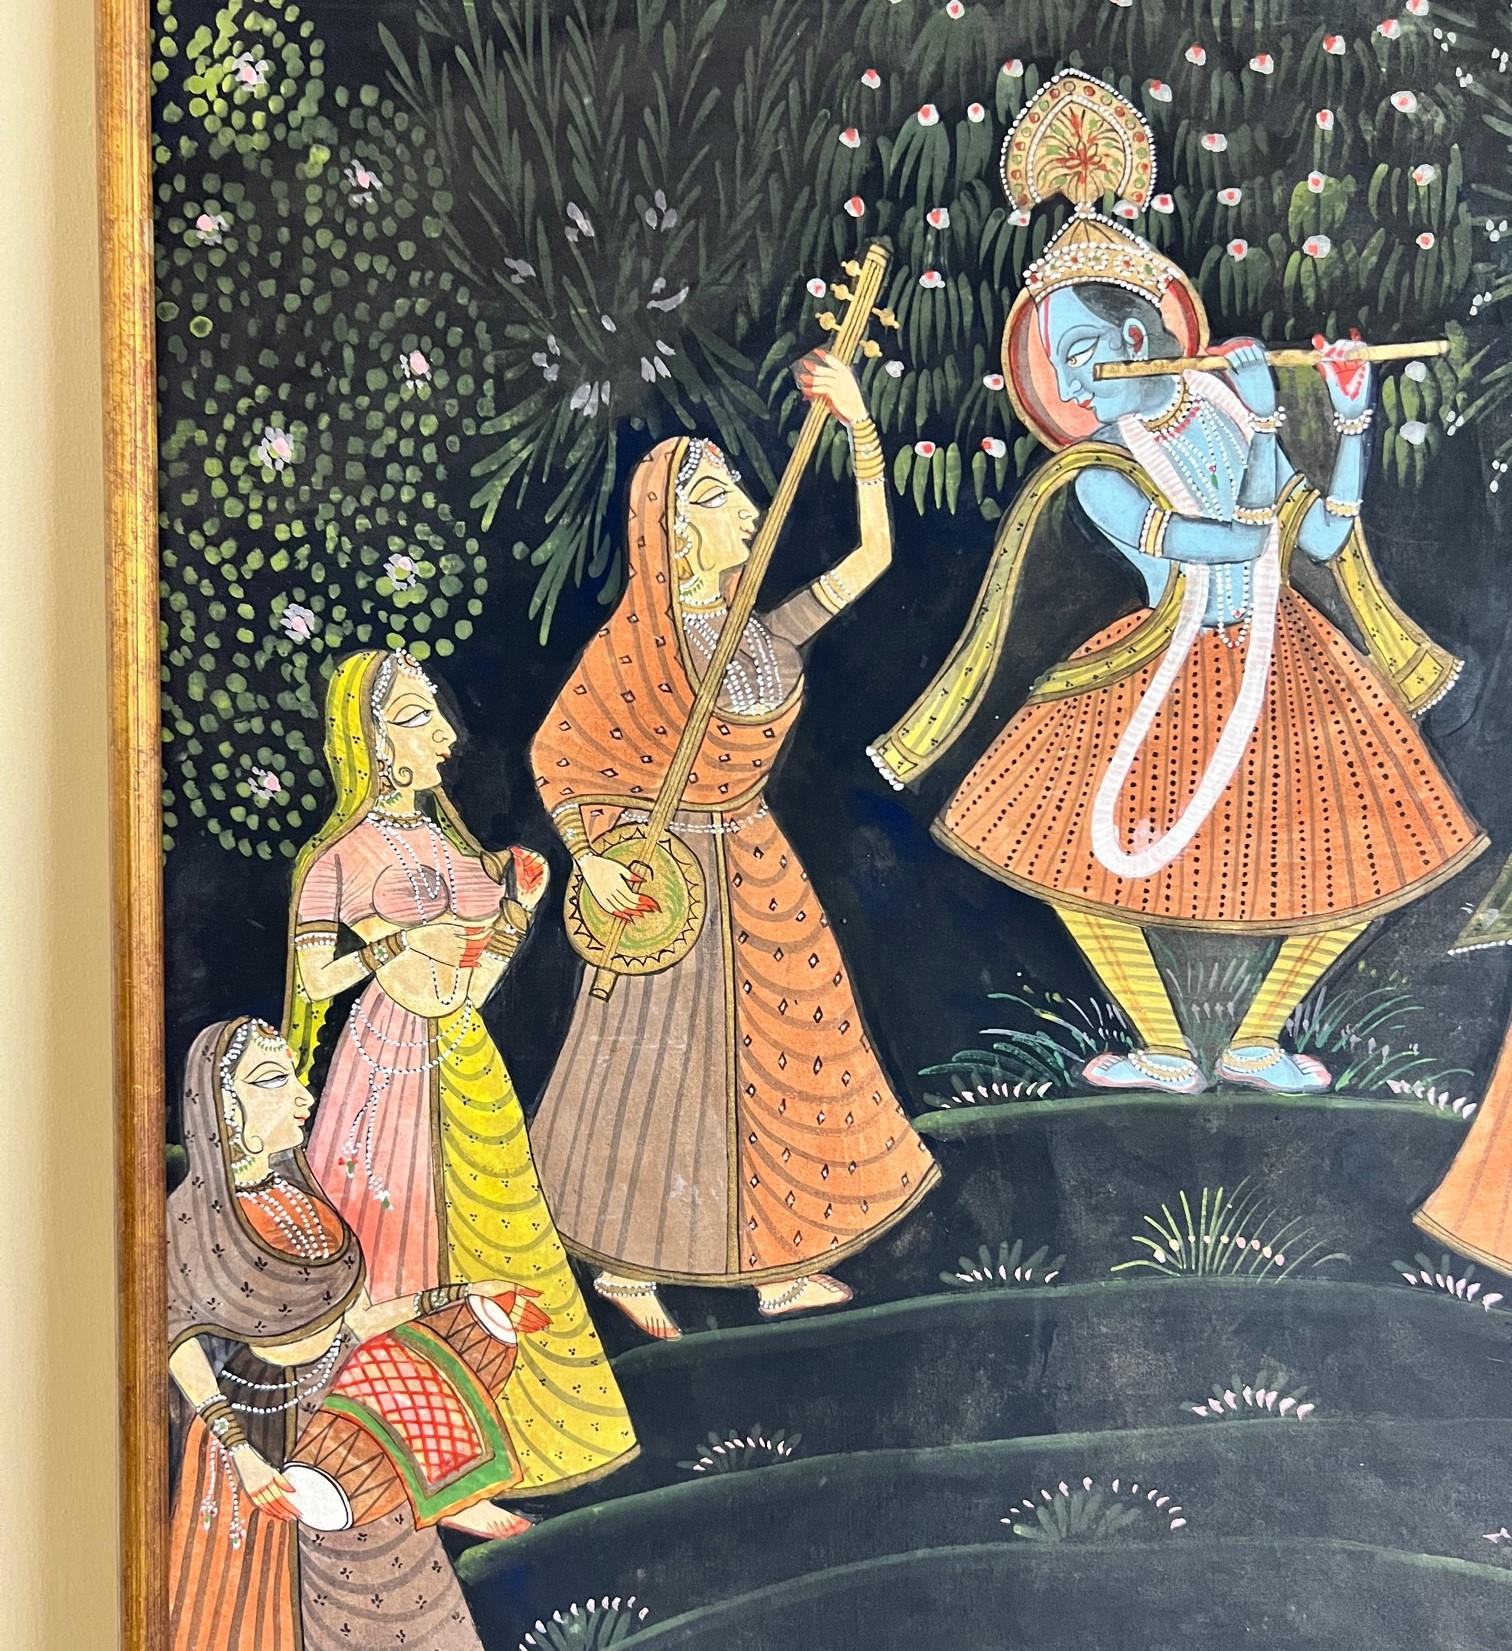 which scale flute did krishna play